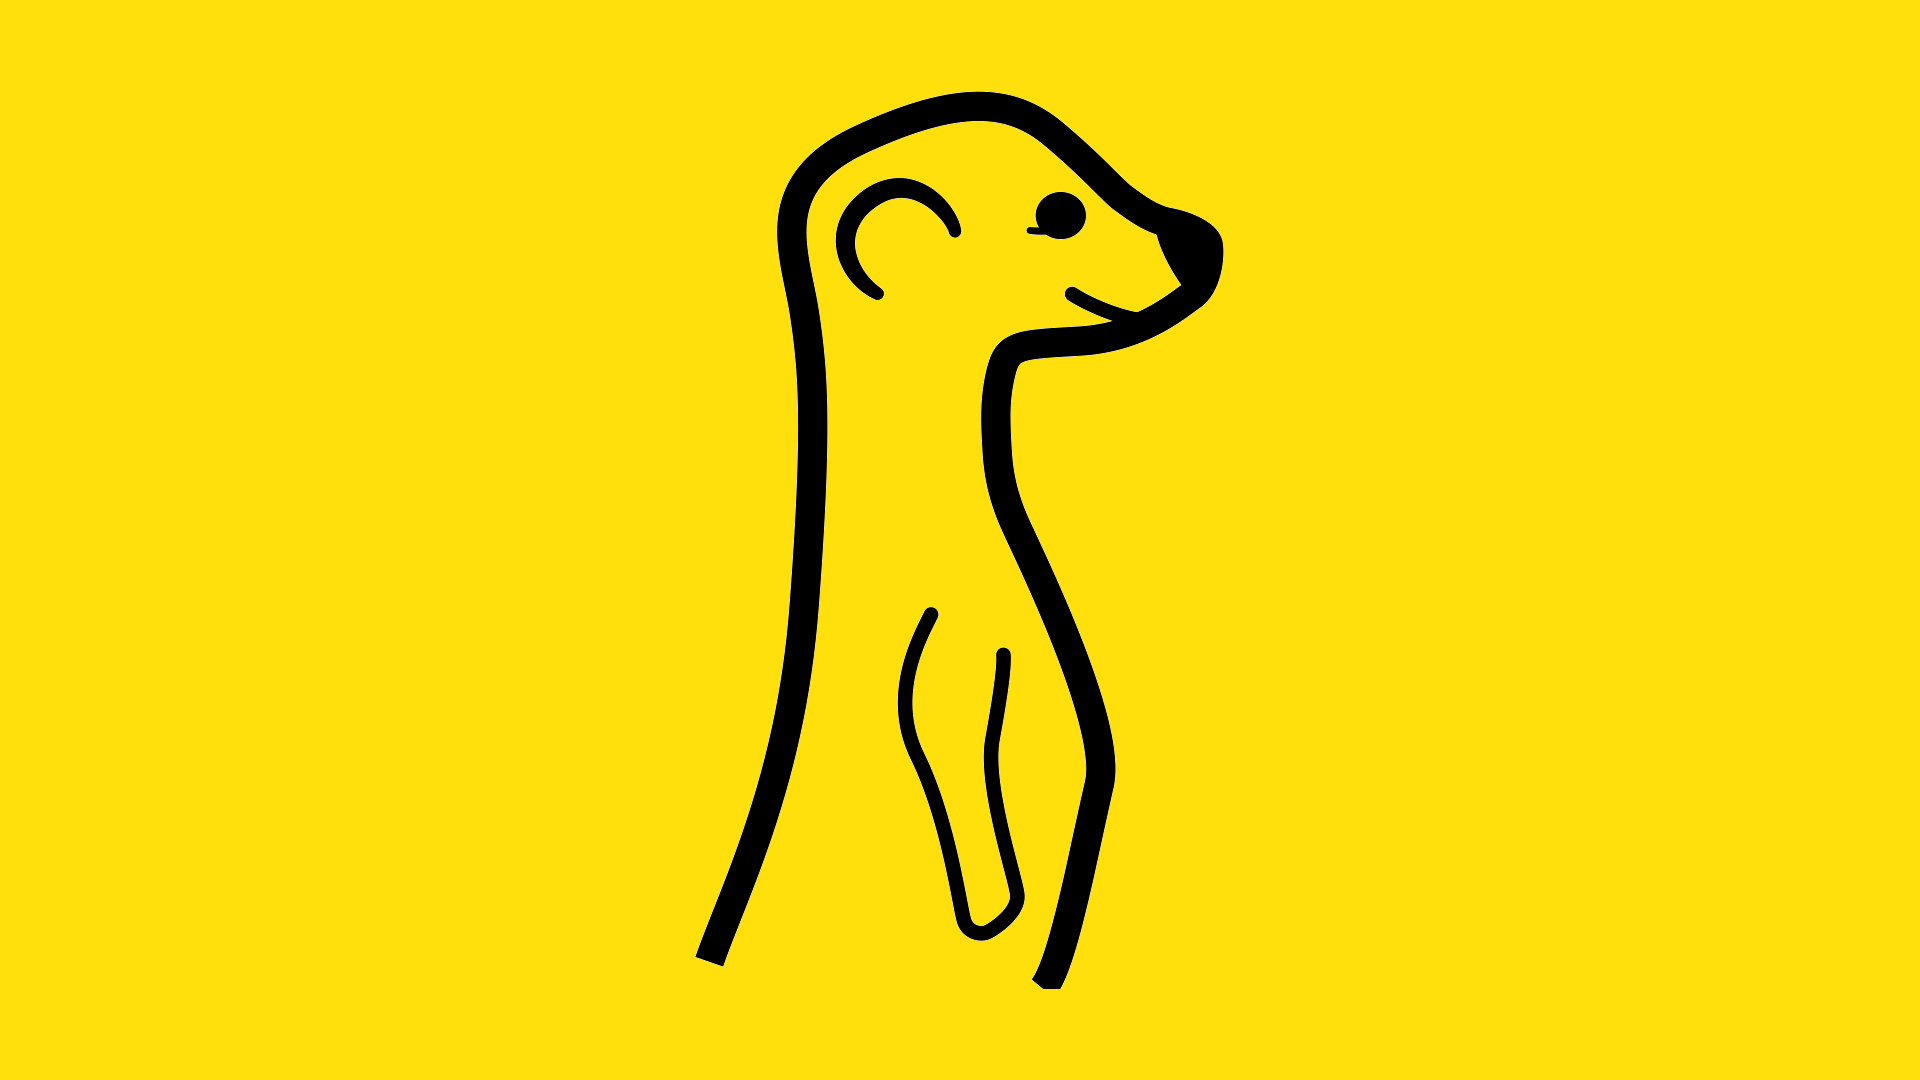 Meerkat Logo - What On Earth Is Meerkat? And Why Should Brands Care? - Marketing Land